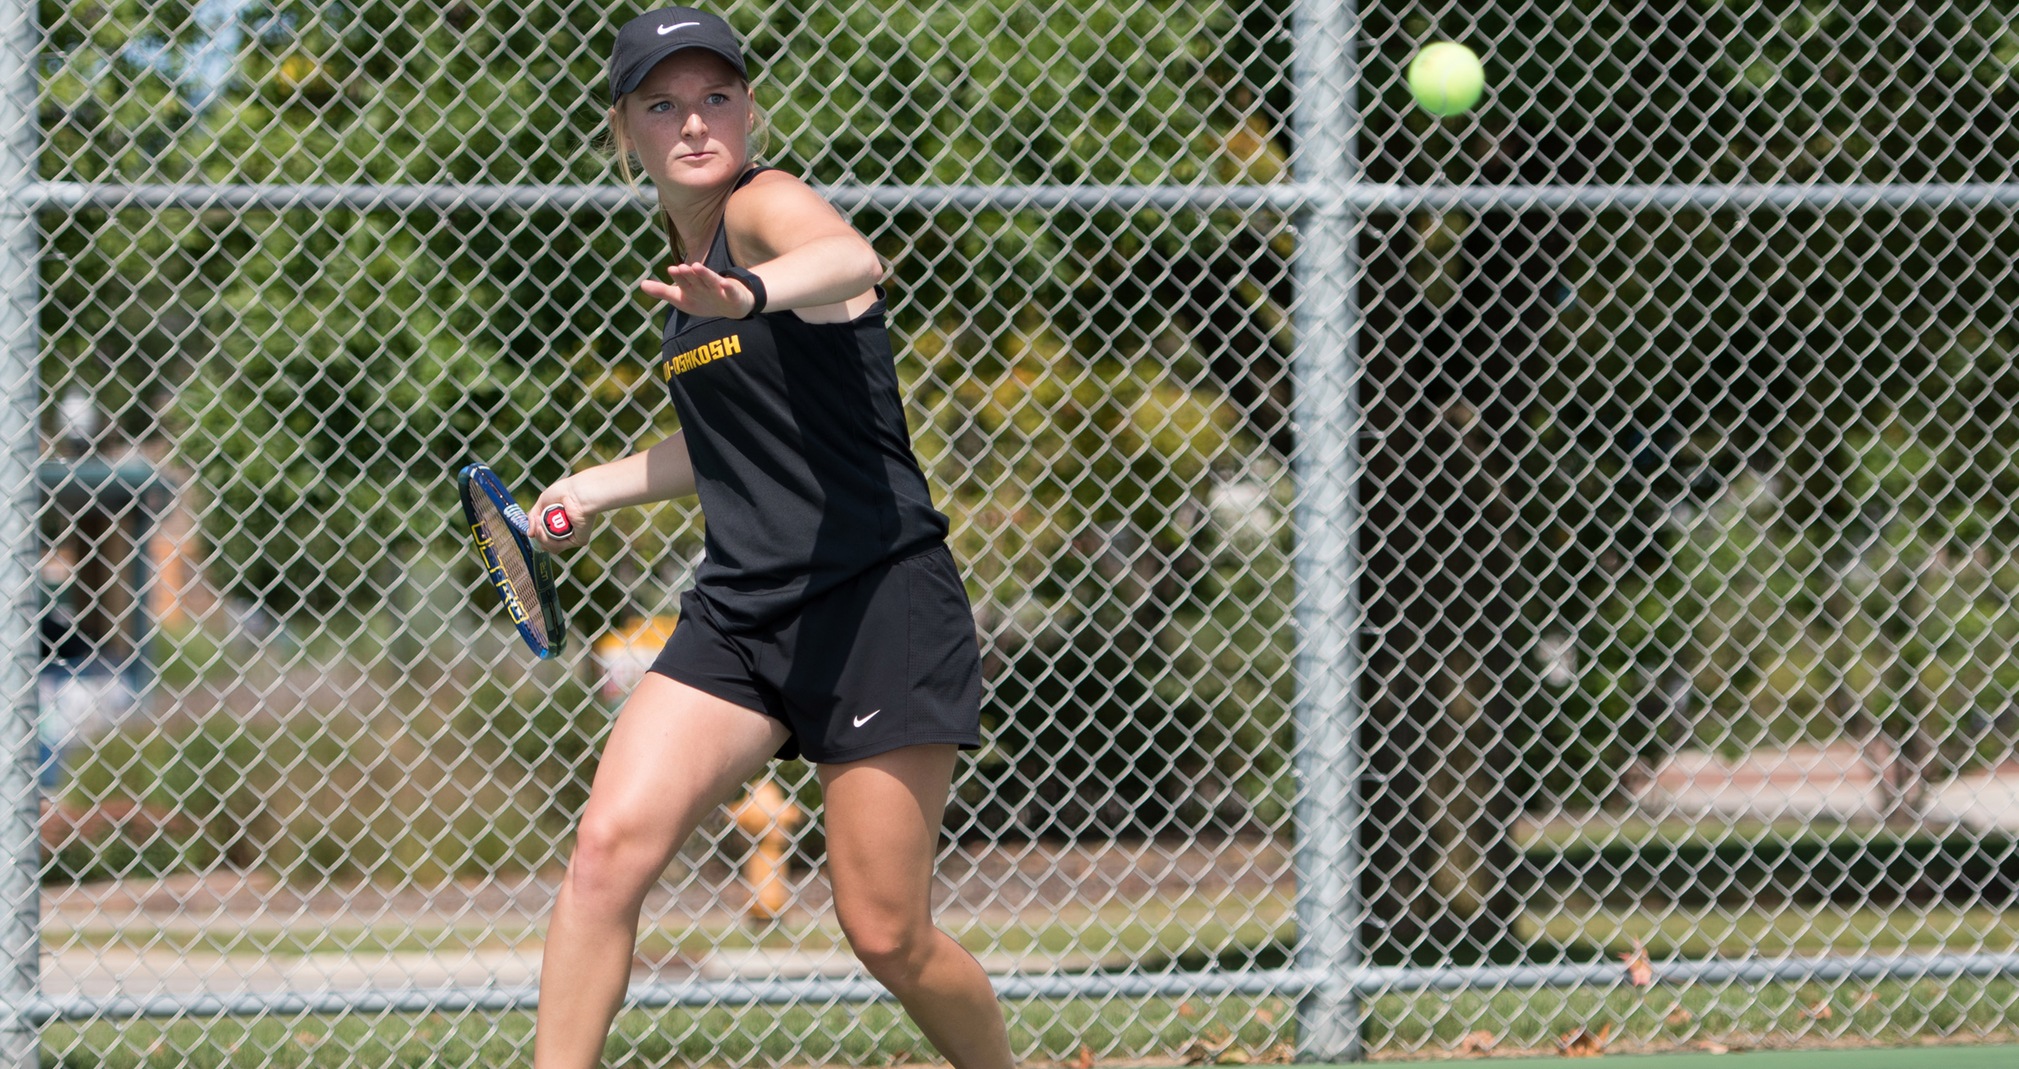 Lesley Kutnink teamed with Taylor Johnson for a fourth-place finish at No. 2 doubles.